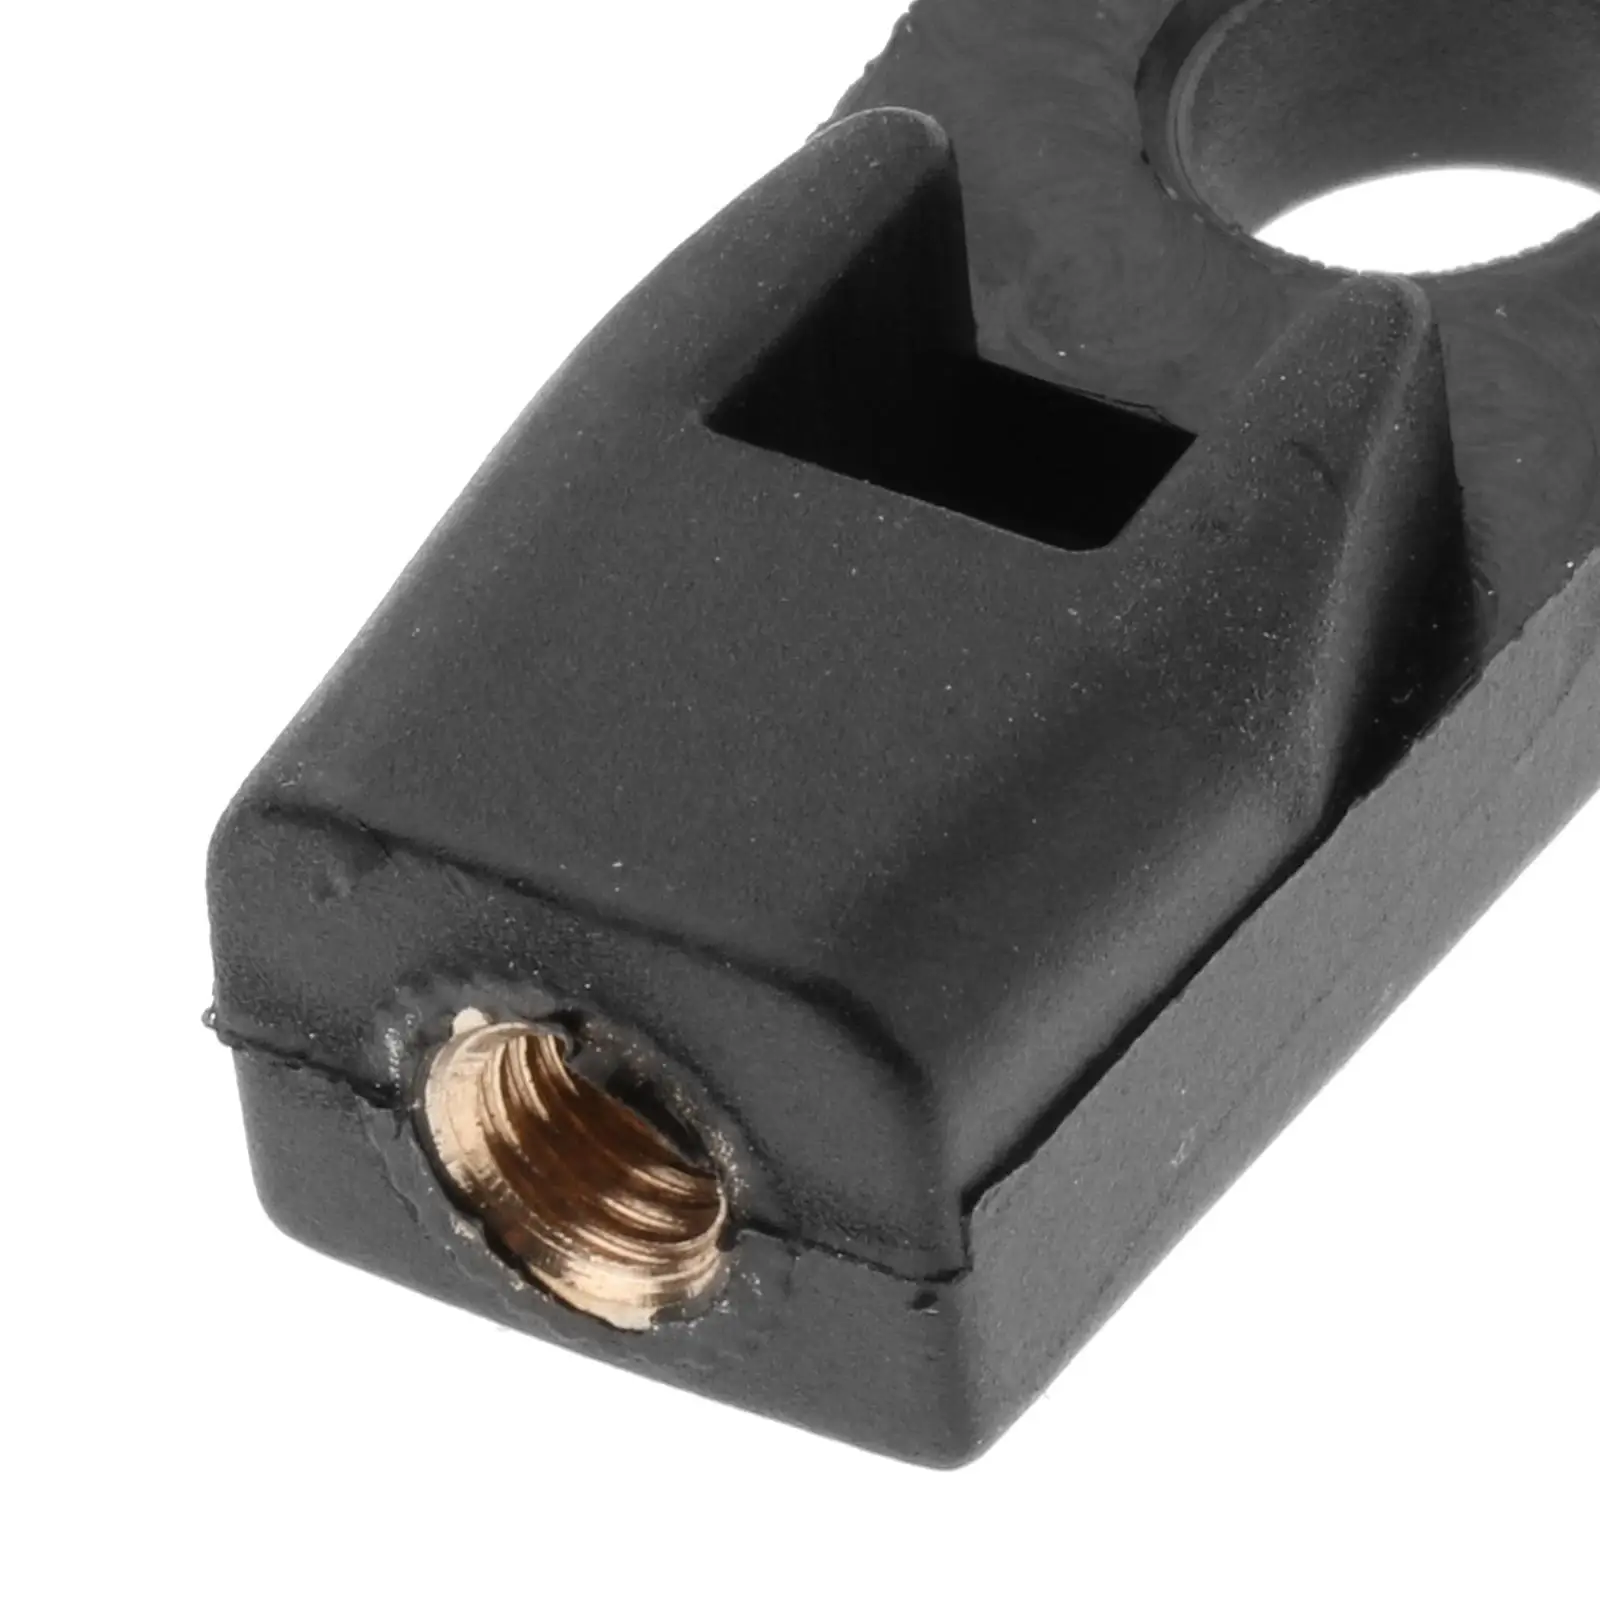 67275-95600 Cable Connector fits for Suzuki Outboard Motor Control Box Cable End